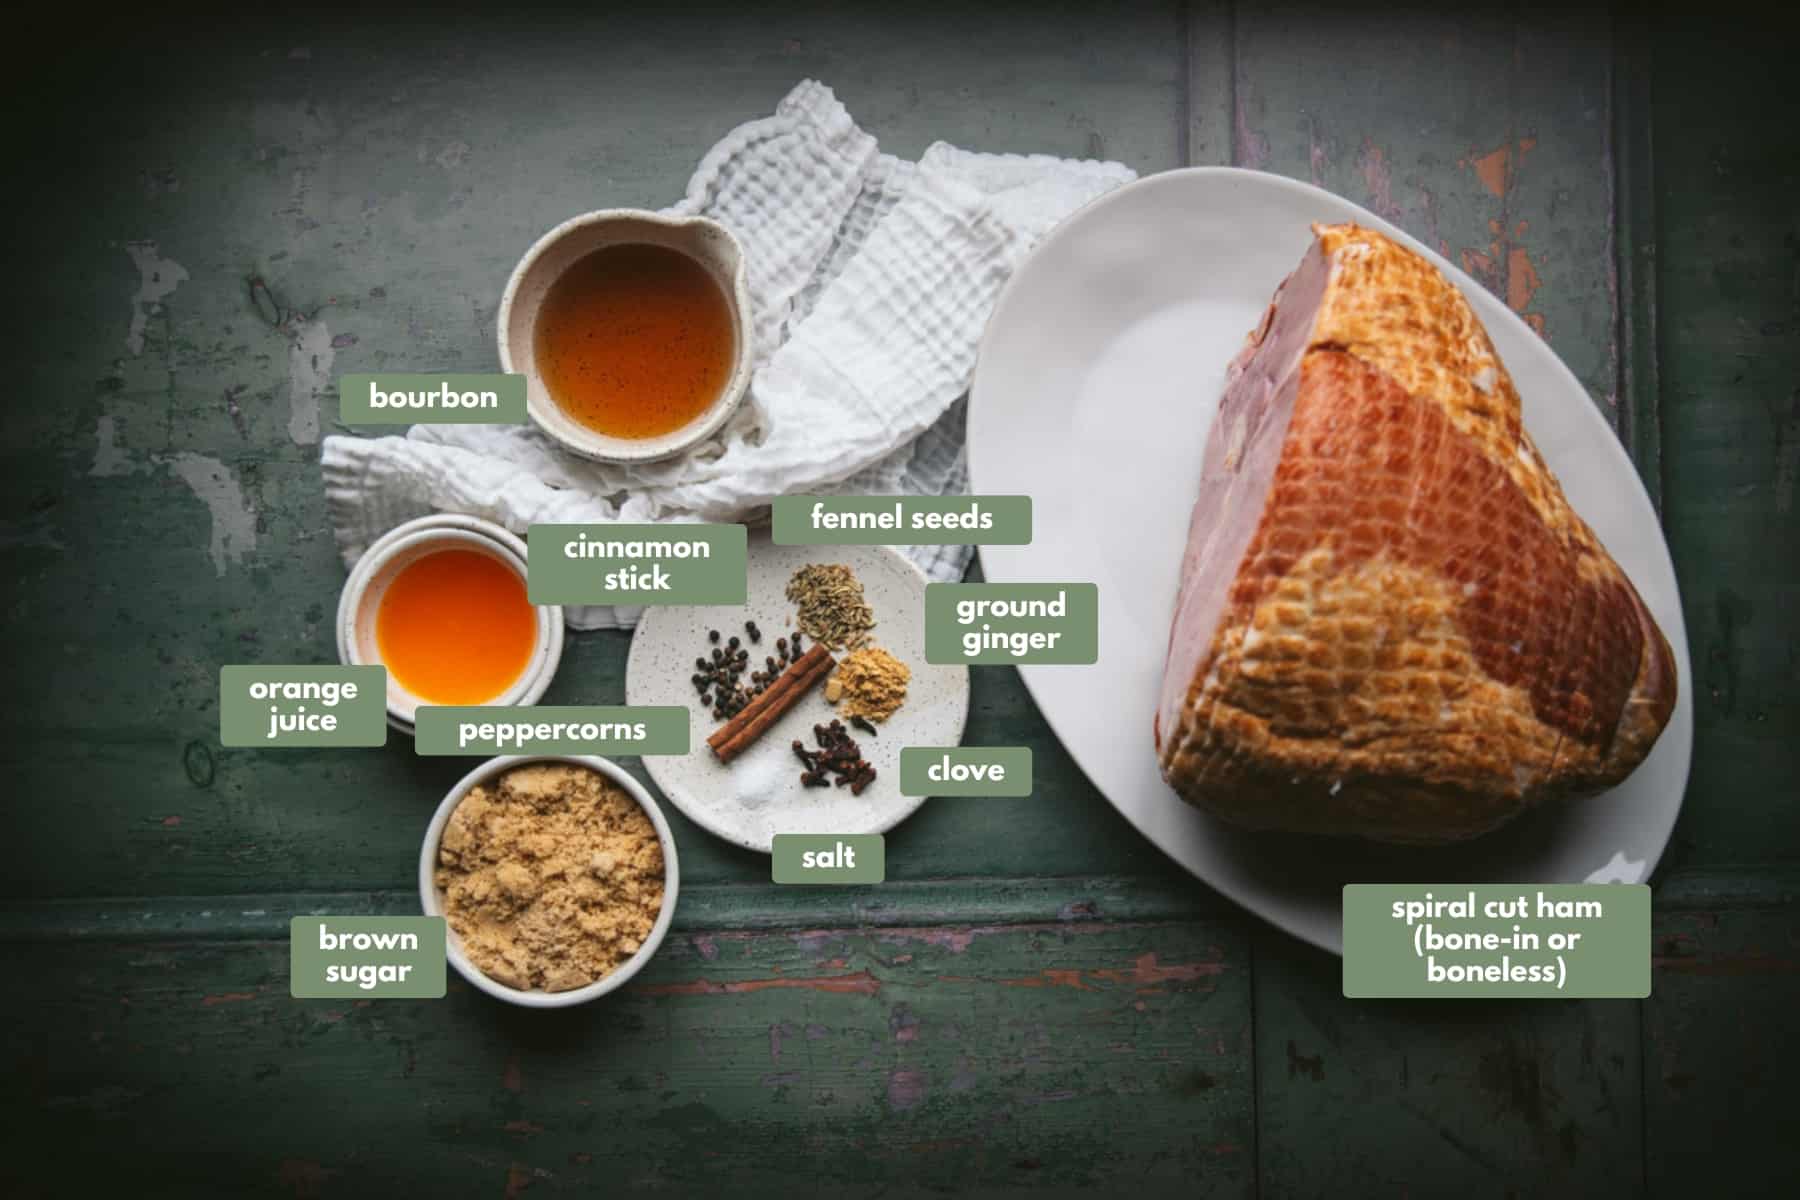 All  the ingredients required to make this glazed ham recipe. 
There is a large spiral cut ham sitting on a large white plate, a white dish filled with bourbon, a small white bowl with orange juice, a white bowl filled with brown sugar and a white plate containing spices: cinnamon sticks, fennel seeds, ground gingr, cloves and salt.